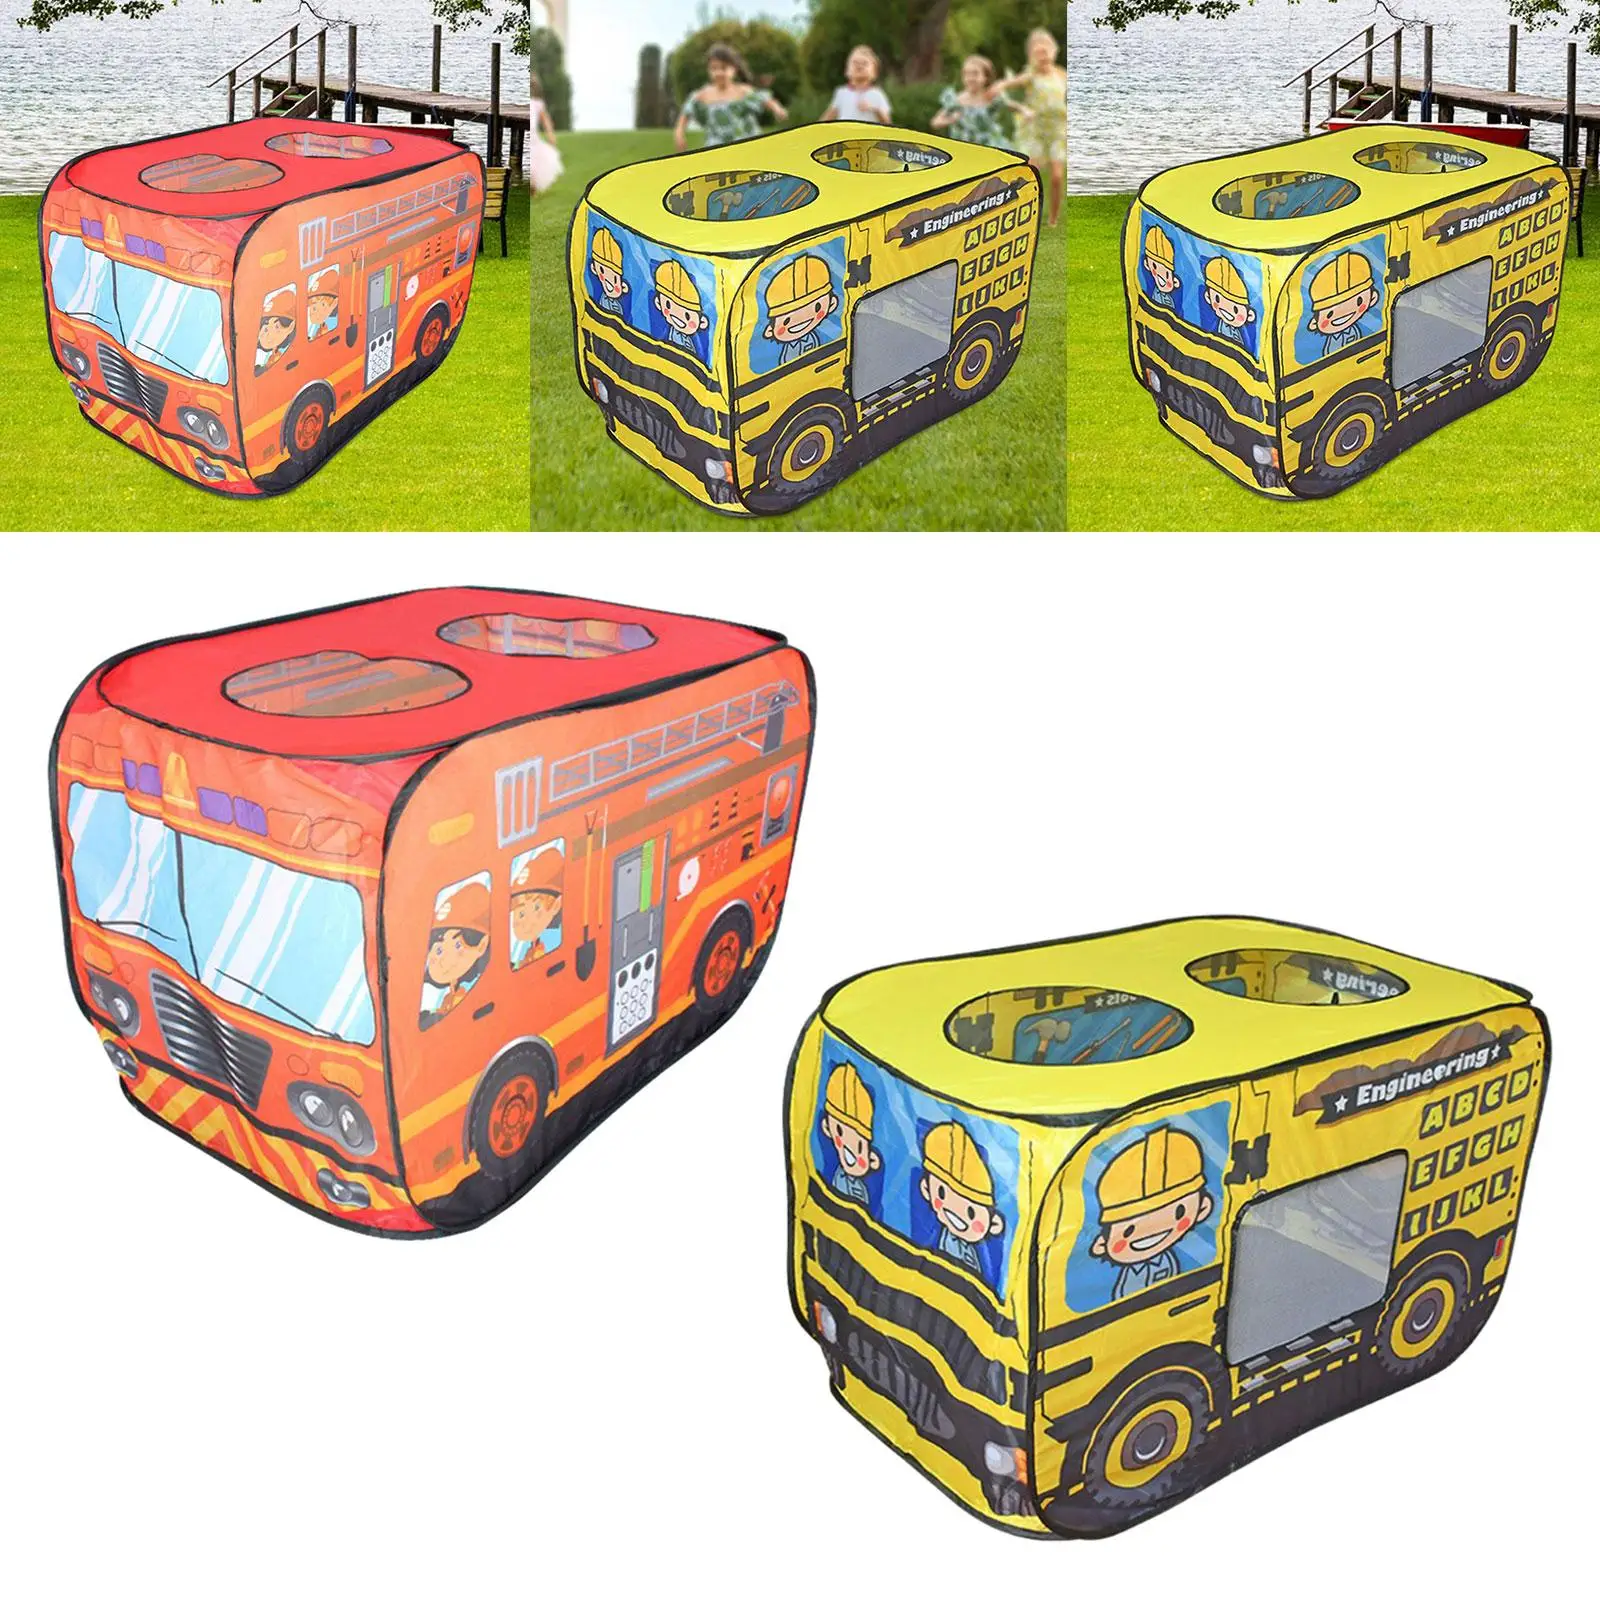 Cartoon Car Play Tent Playhouse Castle Toy Playhouse Play Fun Foldable Tent for Camping Backyard Yard Indoor Holiday Gifts